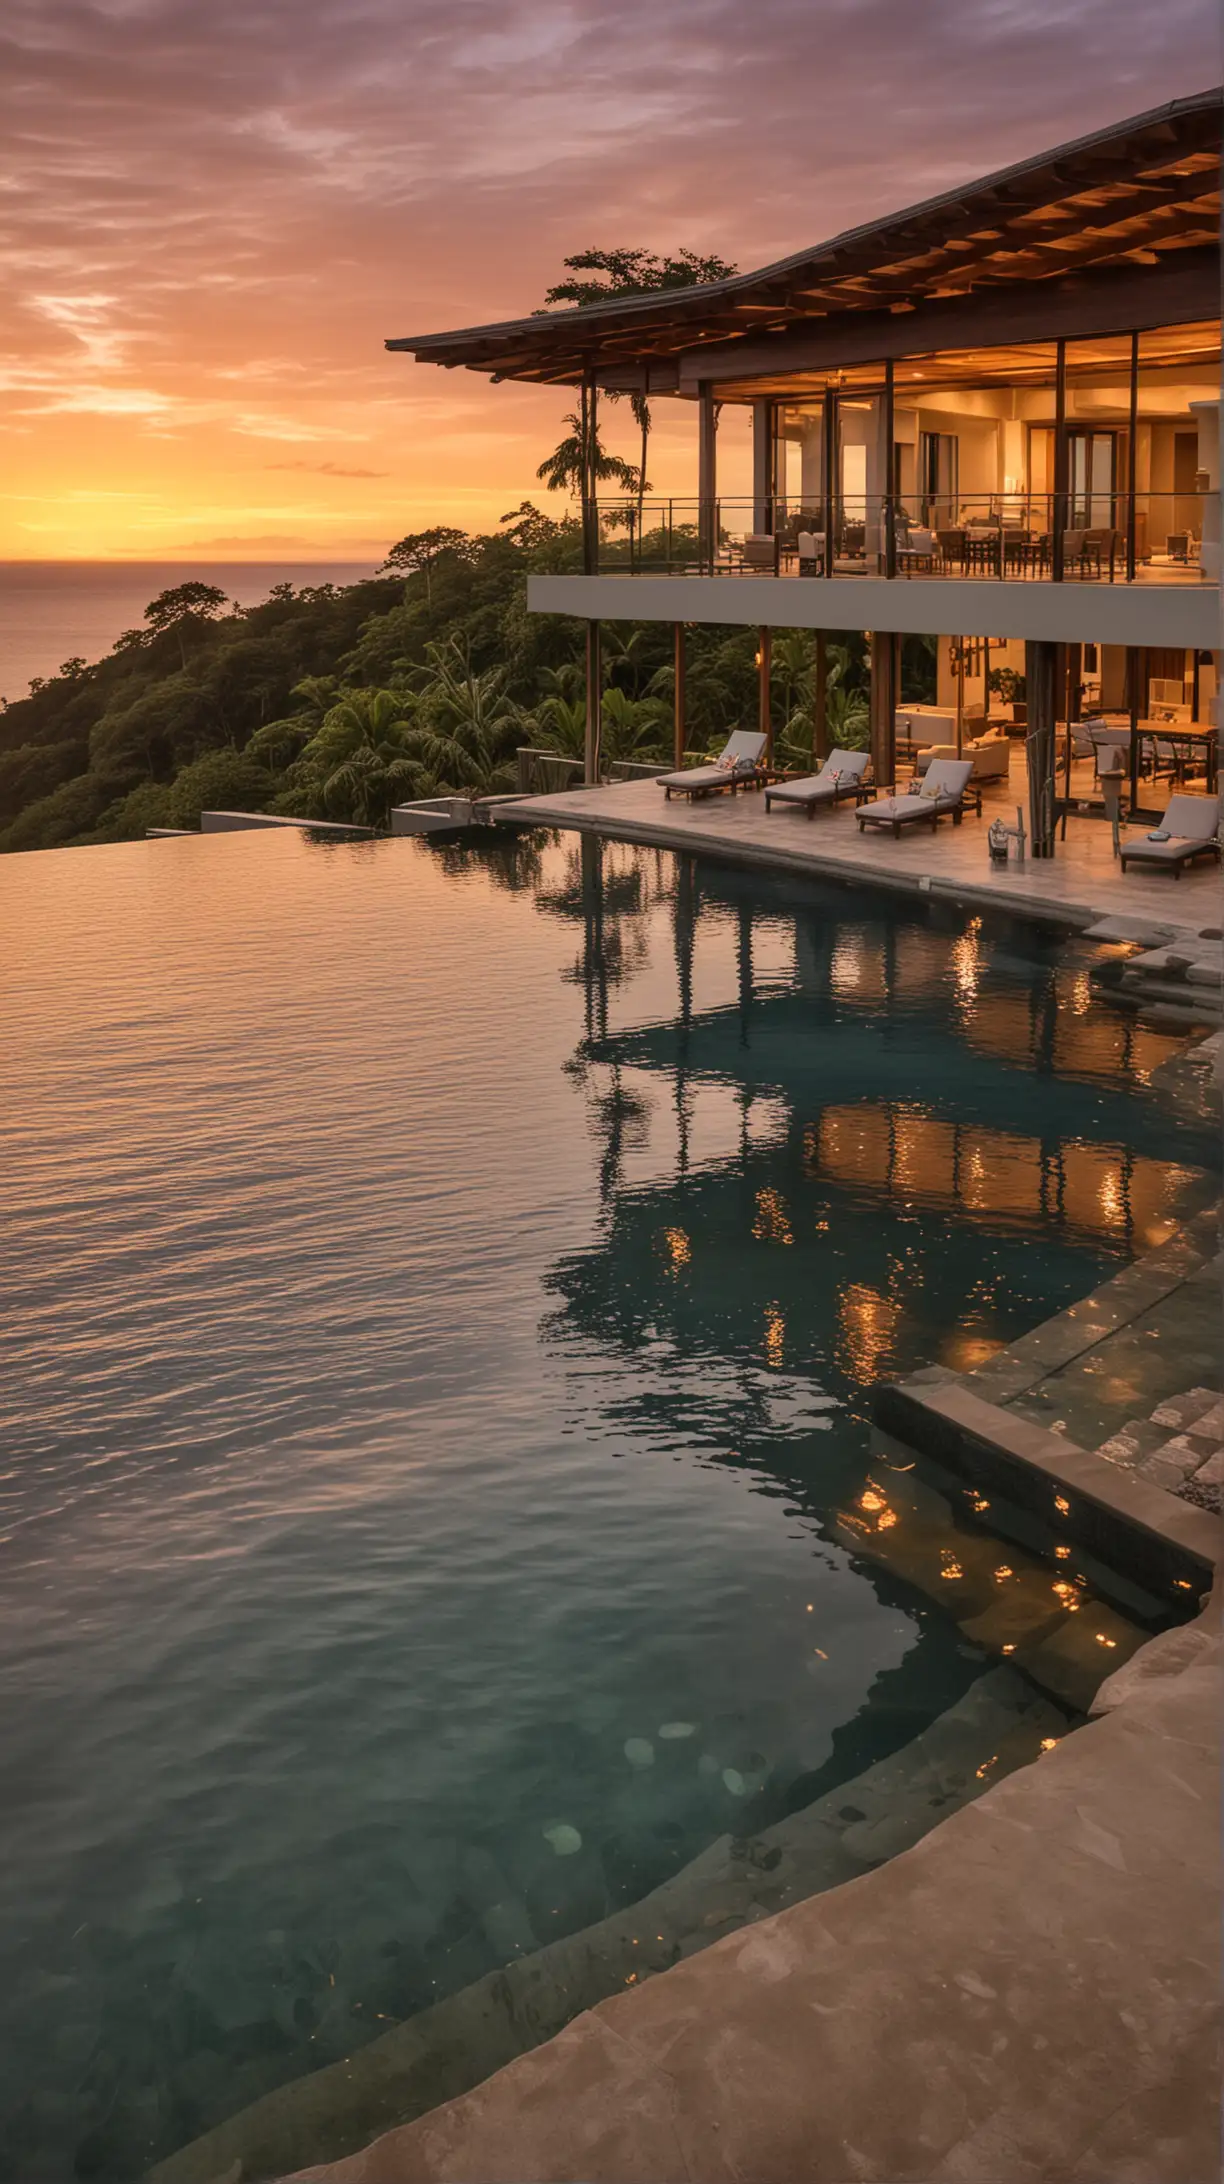 create an image of a beautiful 2 story contemporary beachfront home in costa rica with an infinity pool overlooking the ocean at sunset with beautiful outdoor living spaces and soft warm lighting